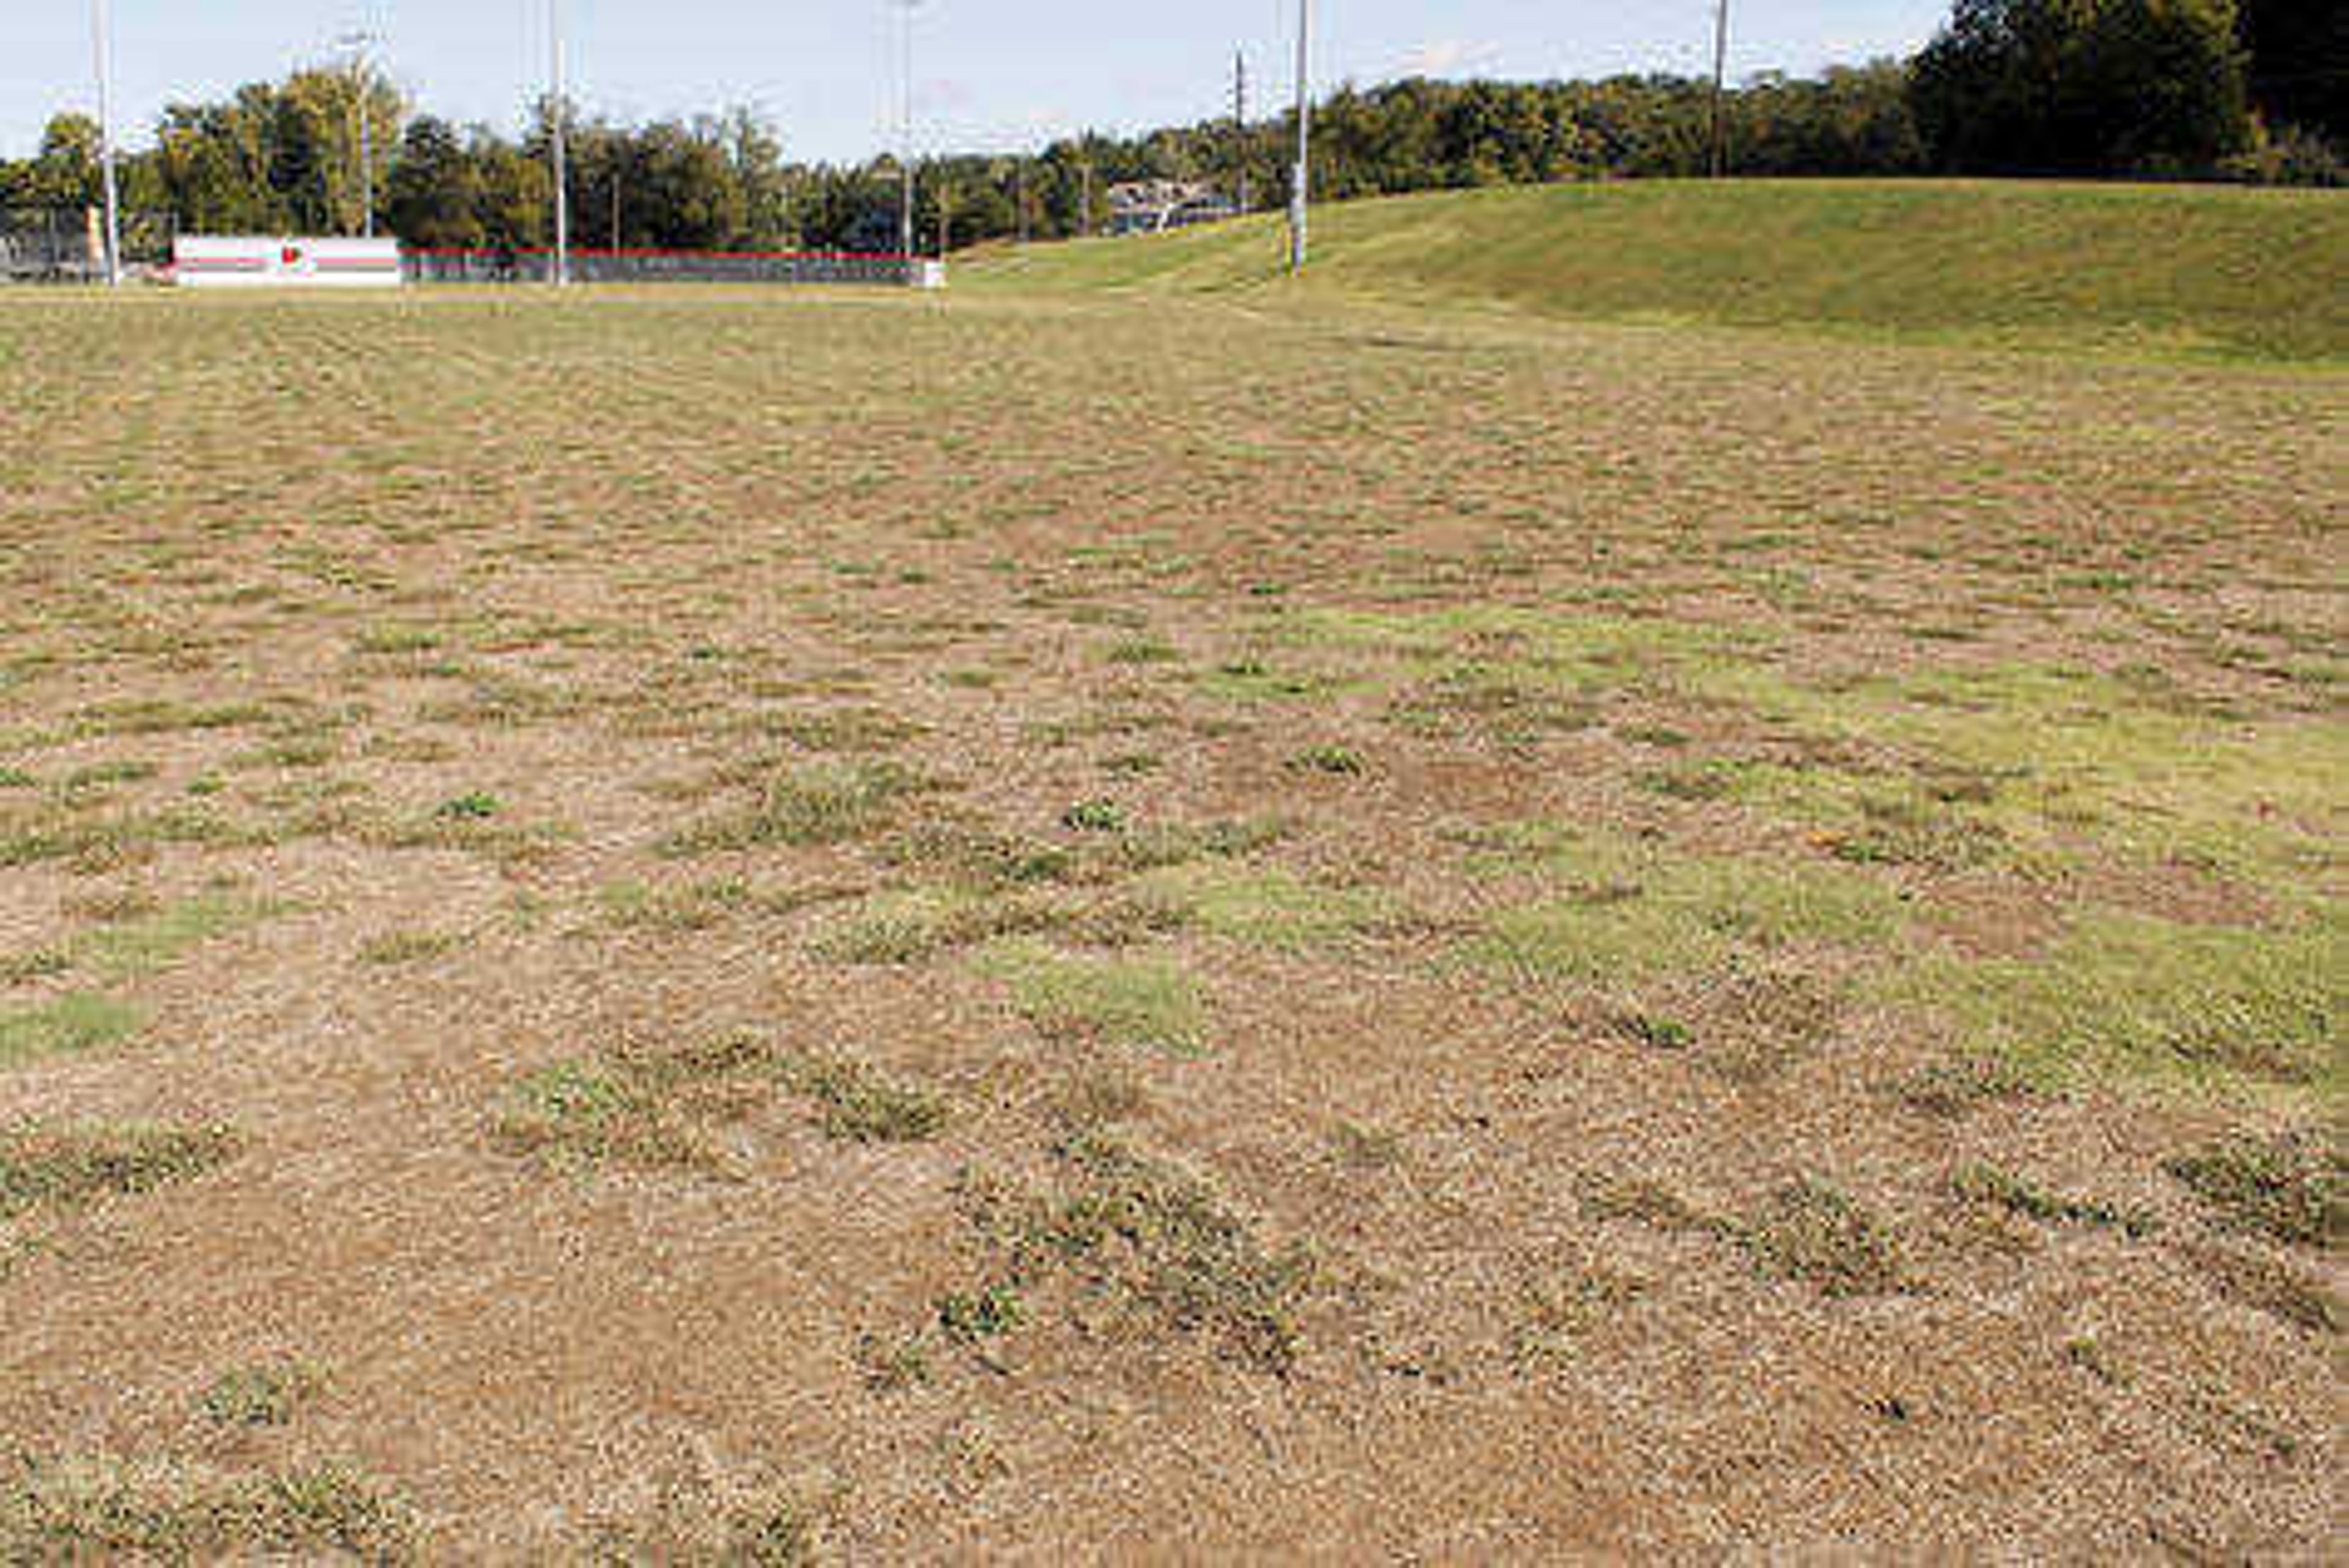 Mother Nature takes toll on intramural fields